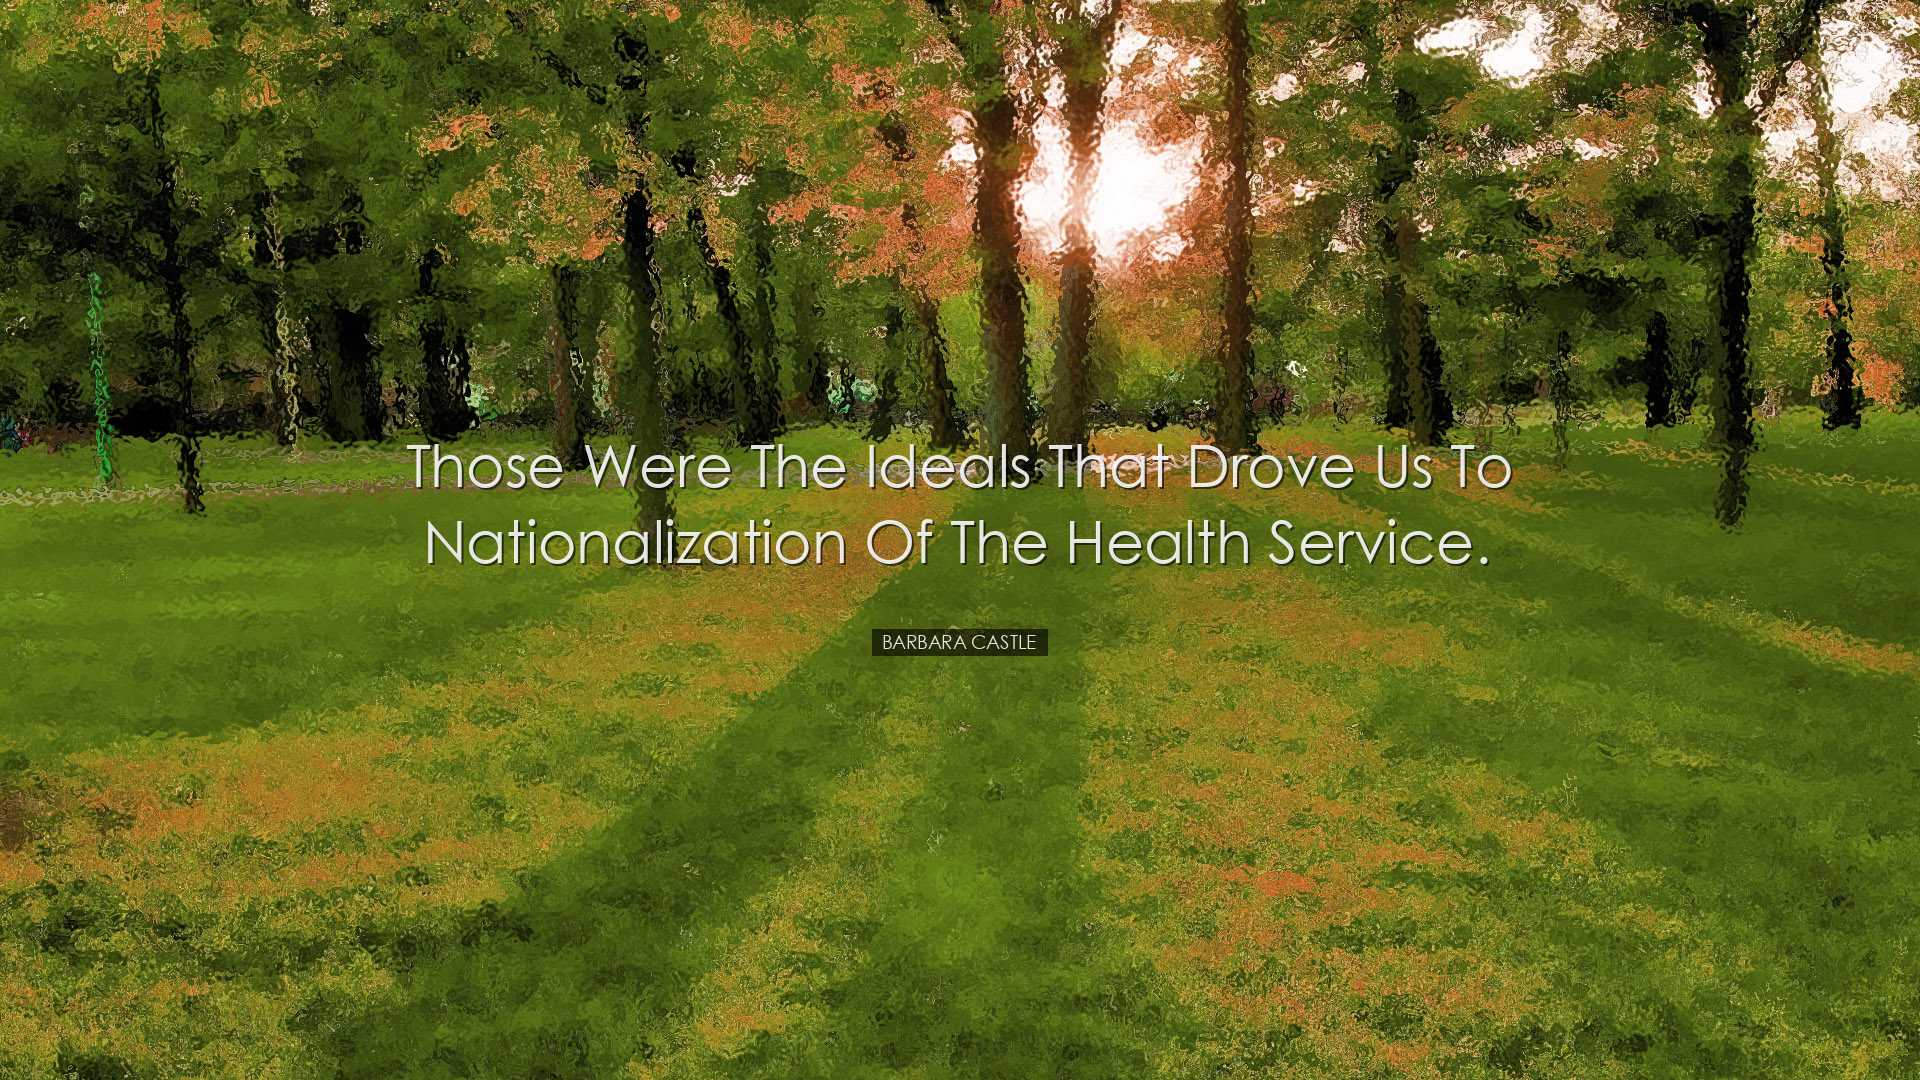 Those were the ideals that drove us to nationalization of the heal